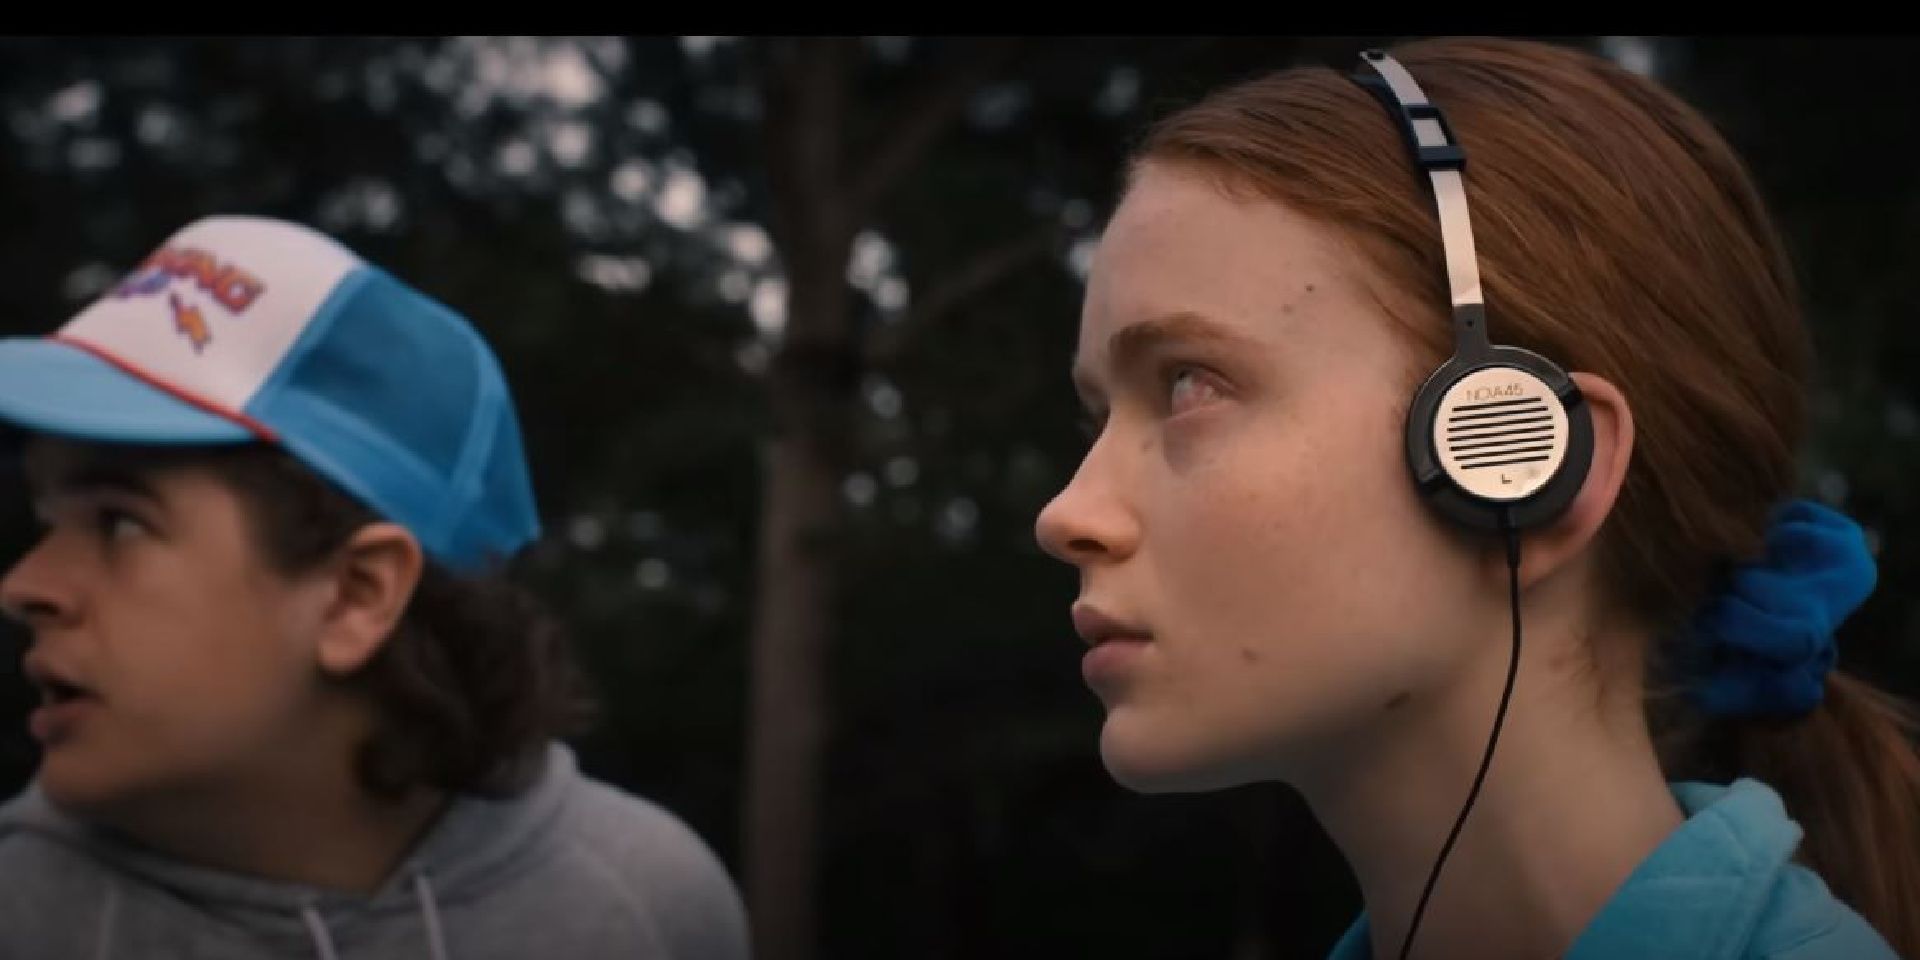 Max listens to music to help fight the curse in Stranger Things.